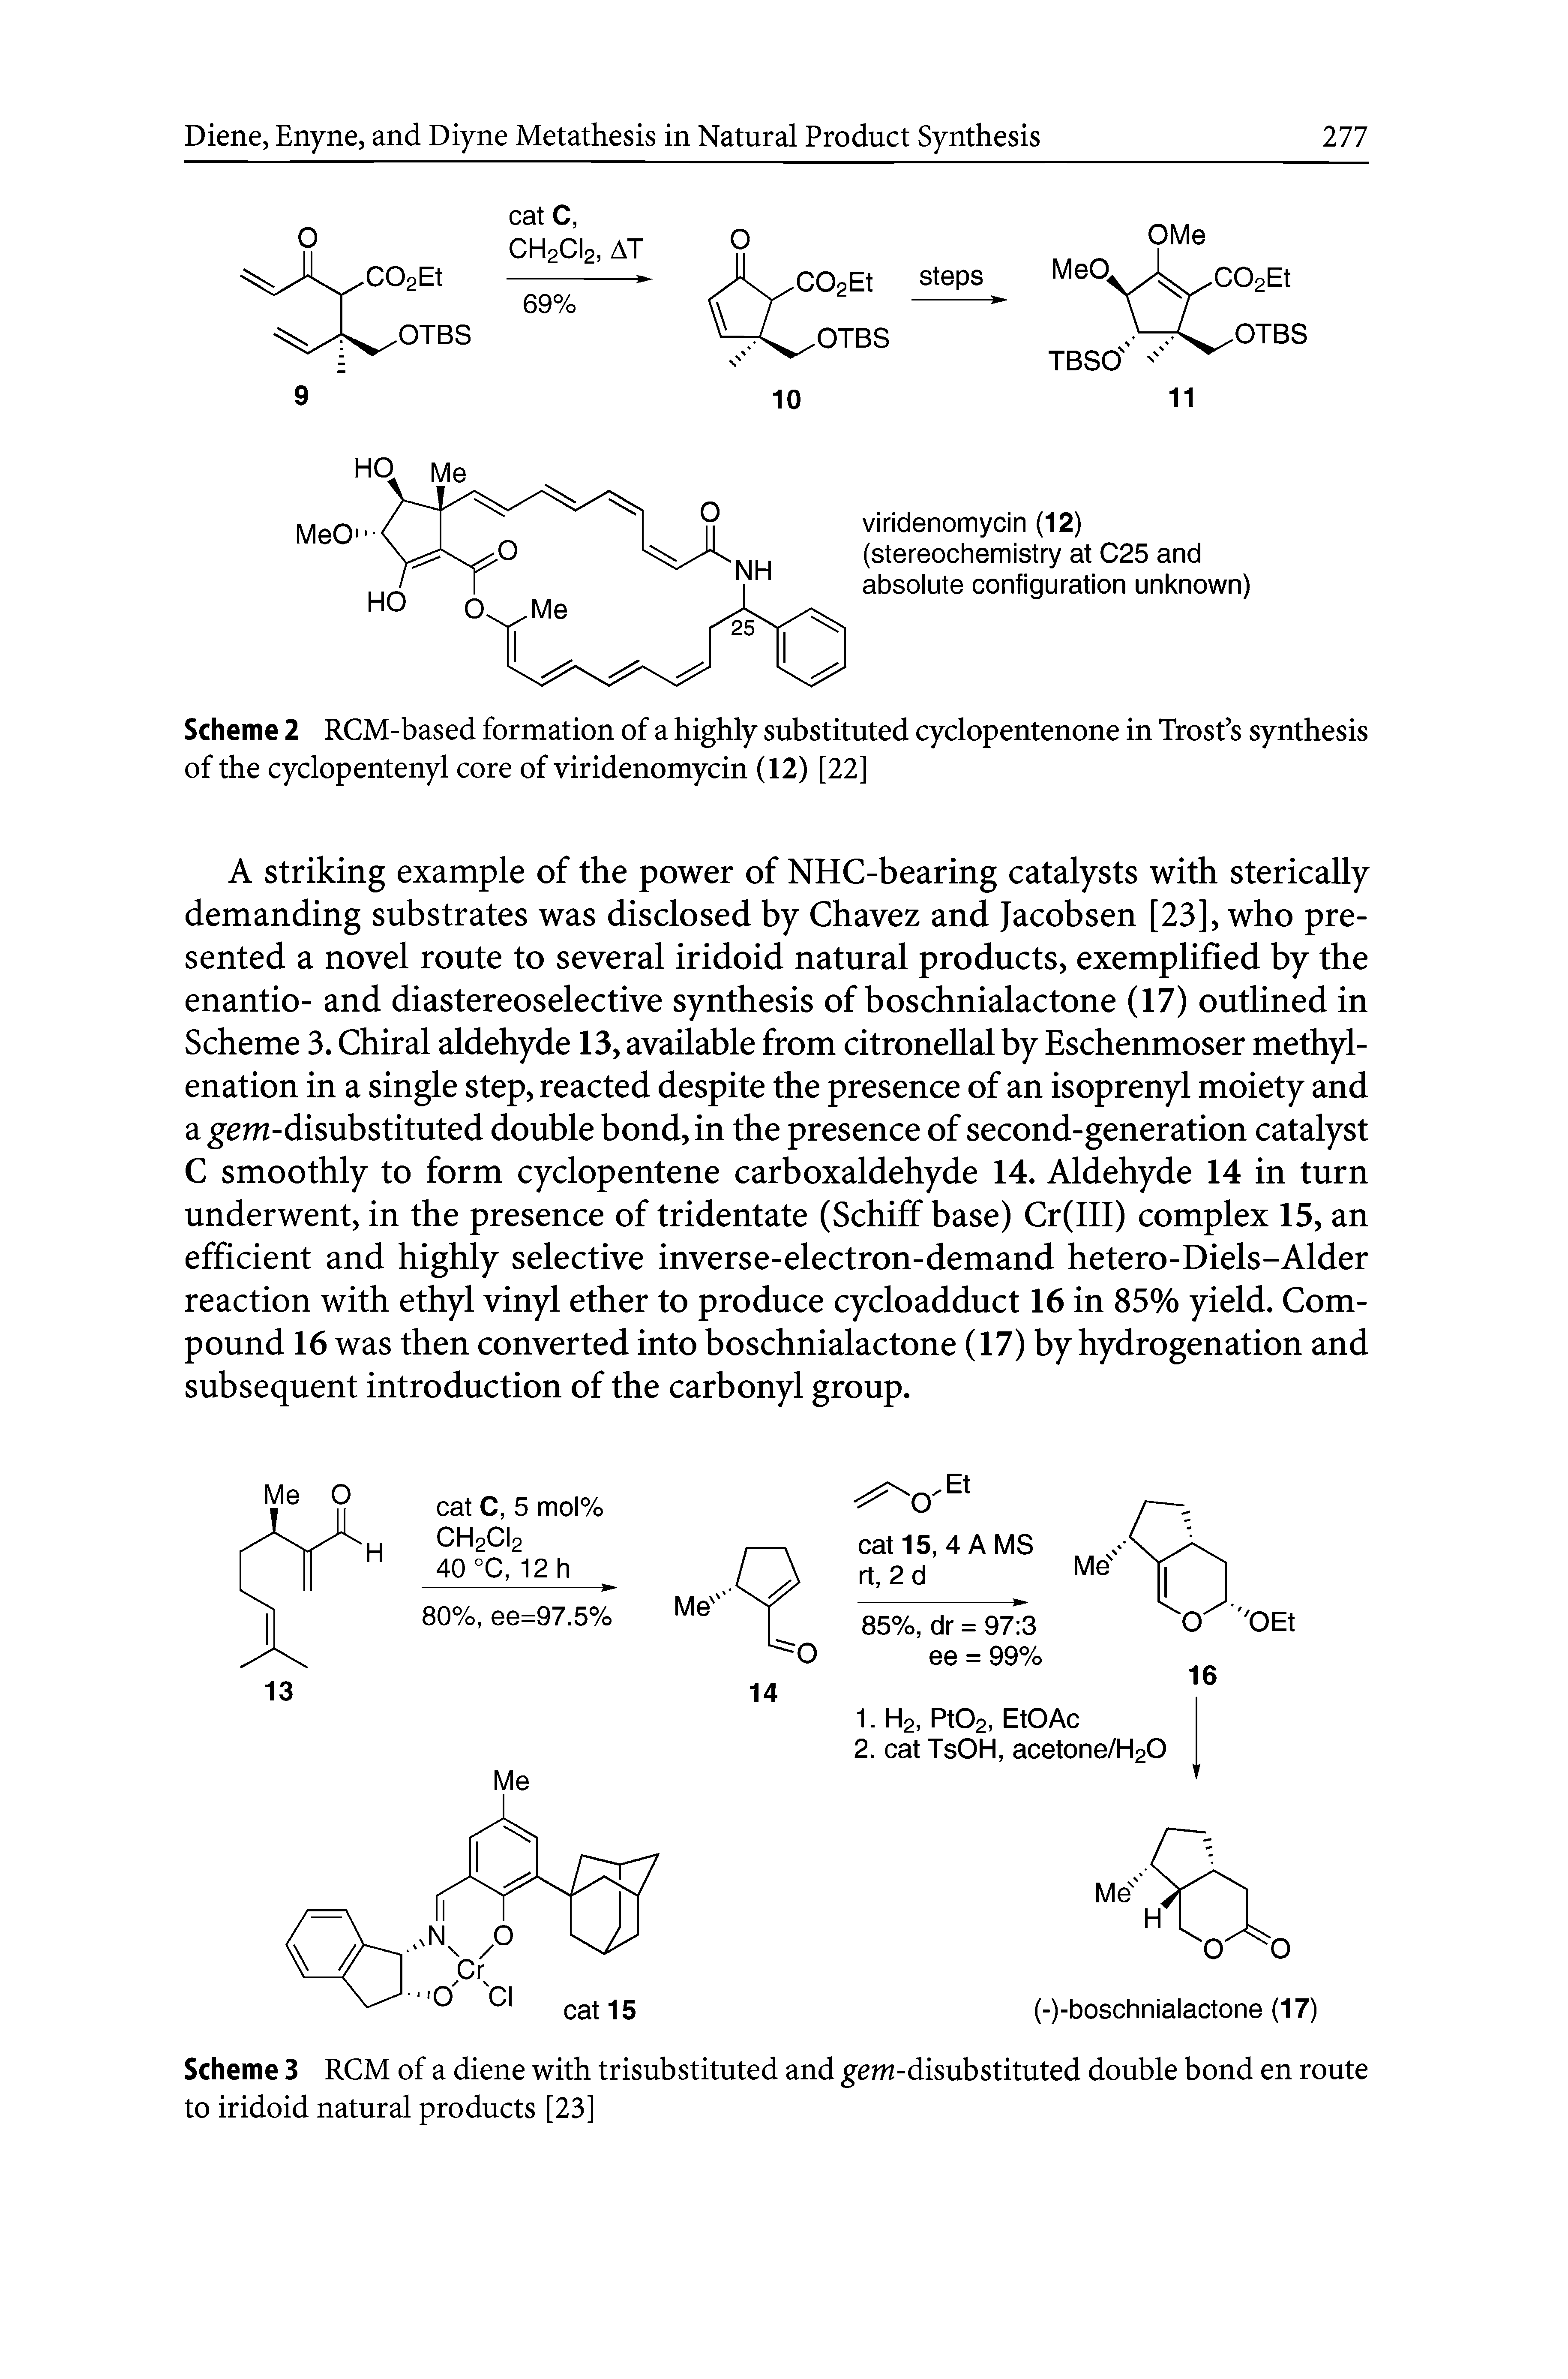 Scheme 3 RCM of a diene with trisubstituted and gem-disubstituted double bond en route to iridoid natural products [23]...